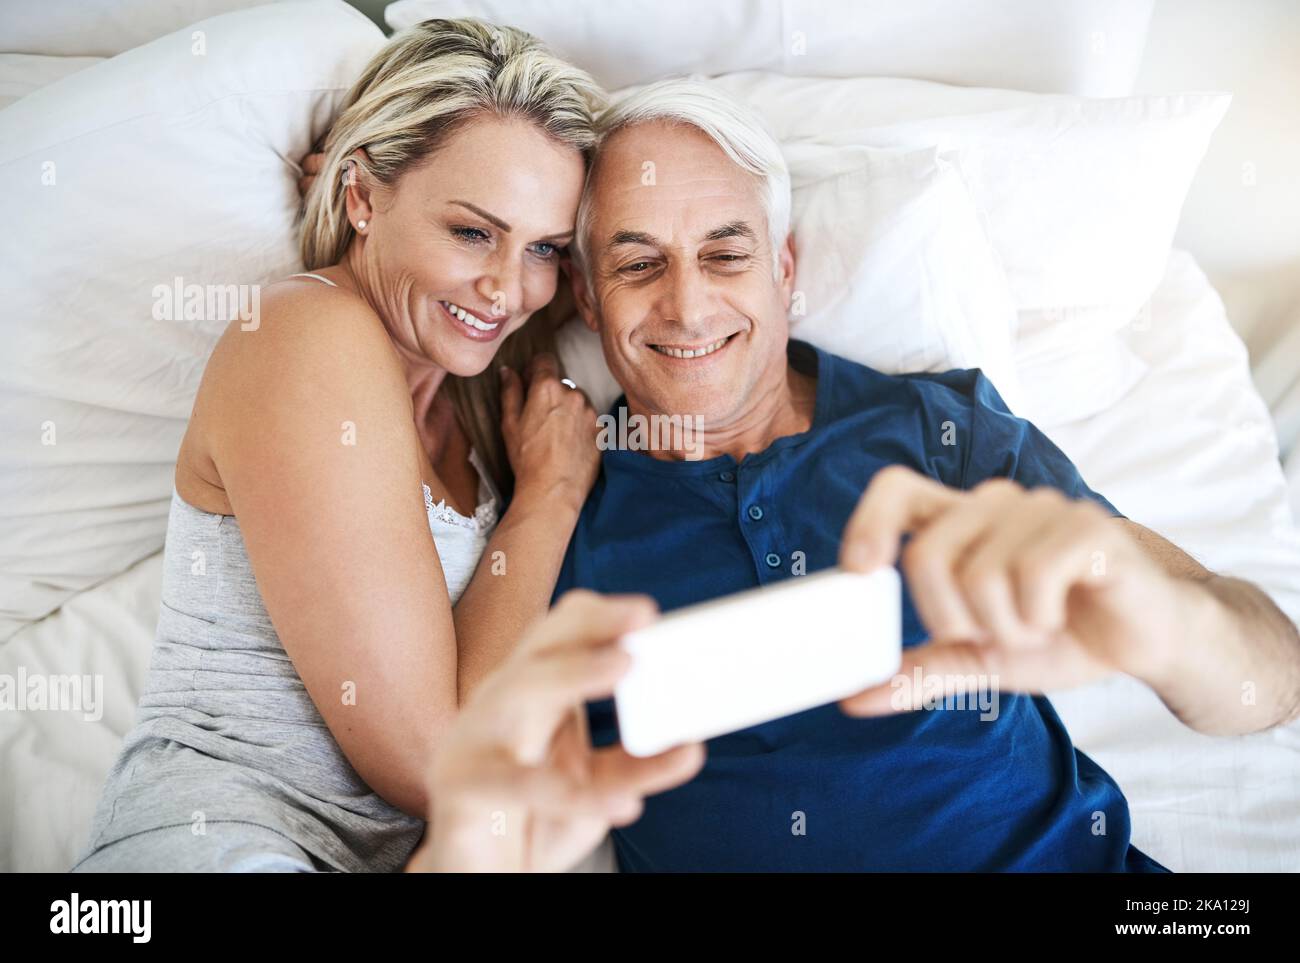 Lets say hello to the world with a selfie. an affectionate mature couple taking selfies in bed together at home. Stock Photo